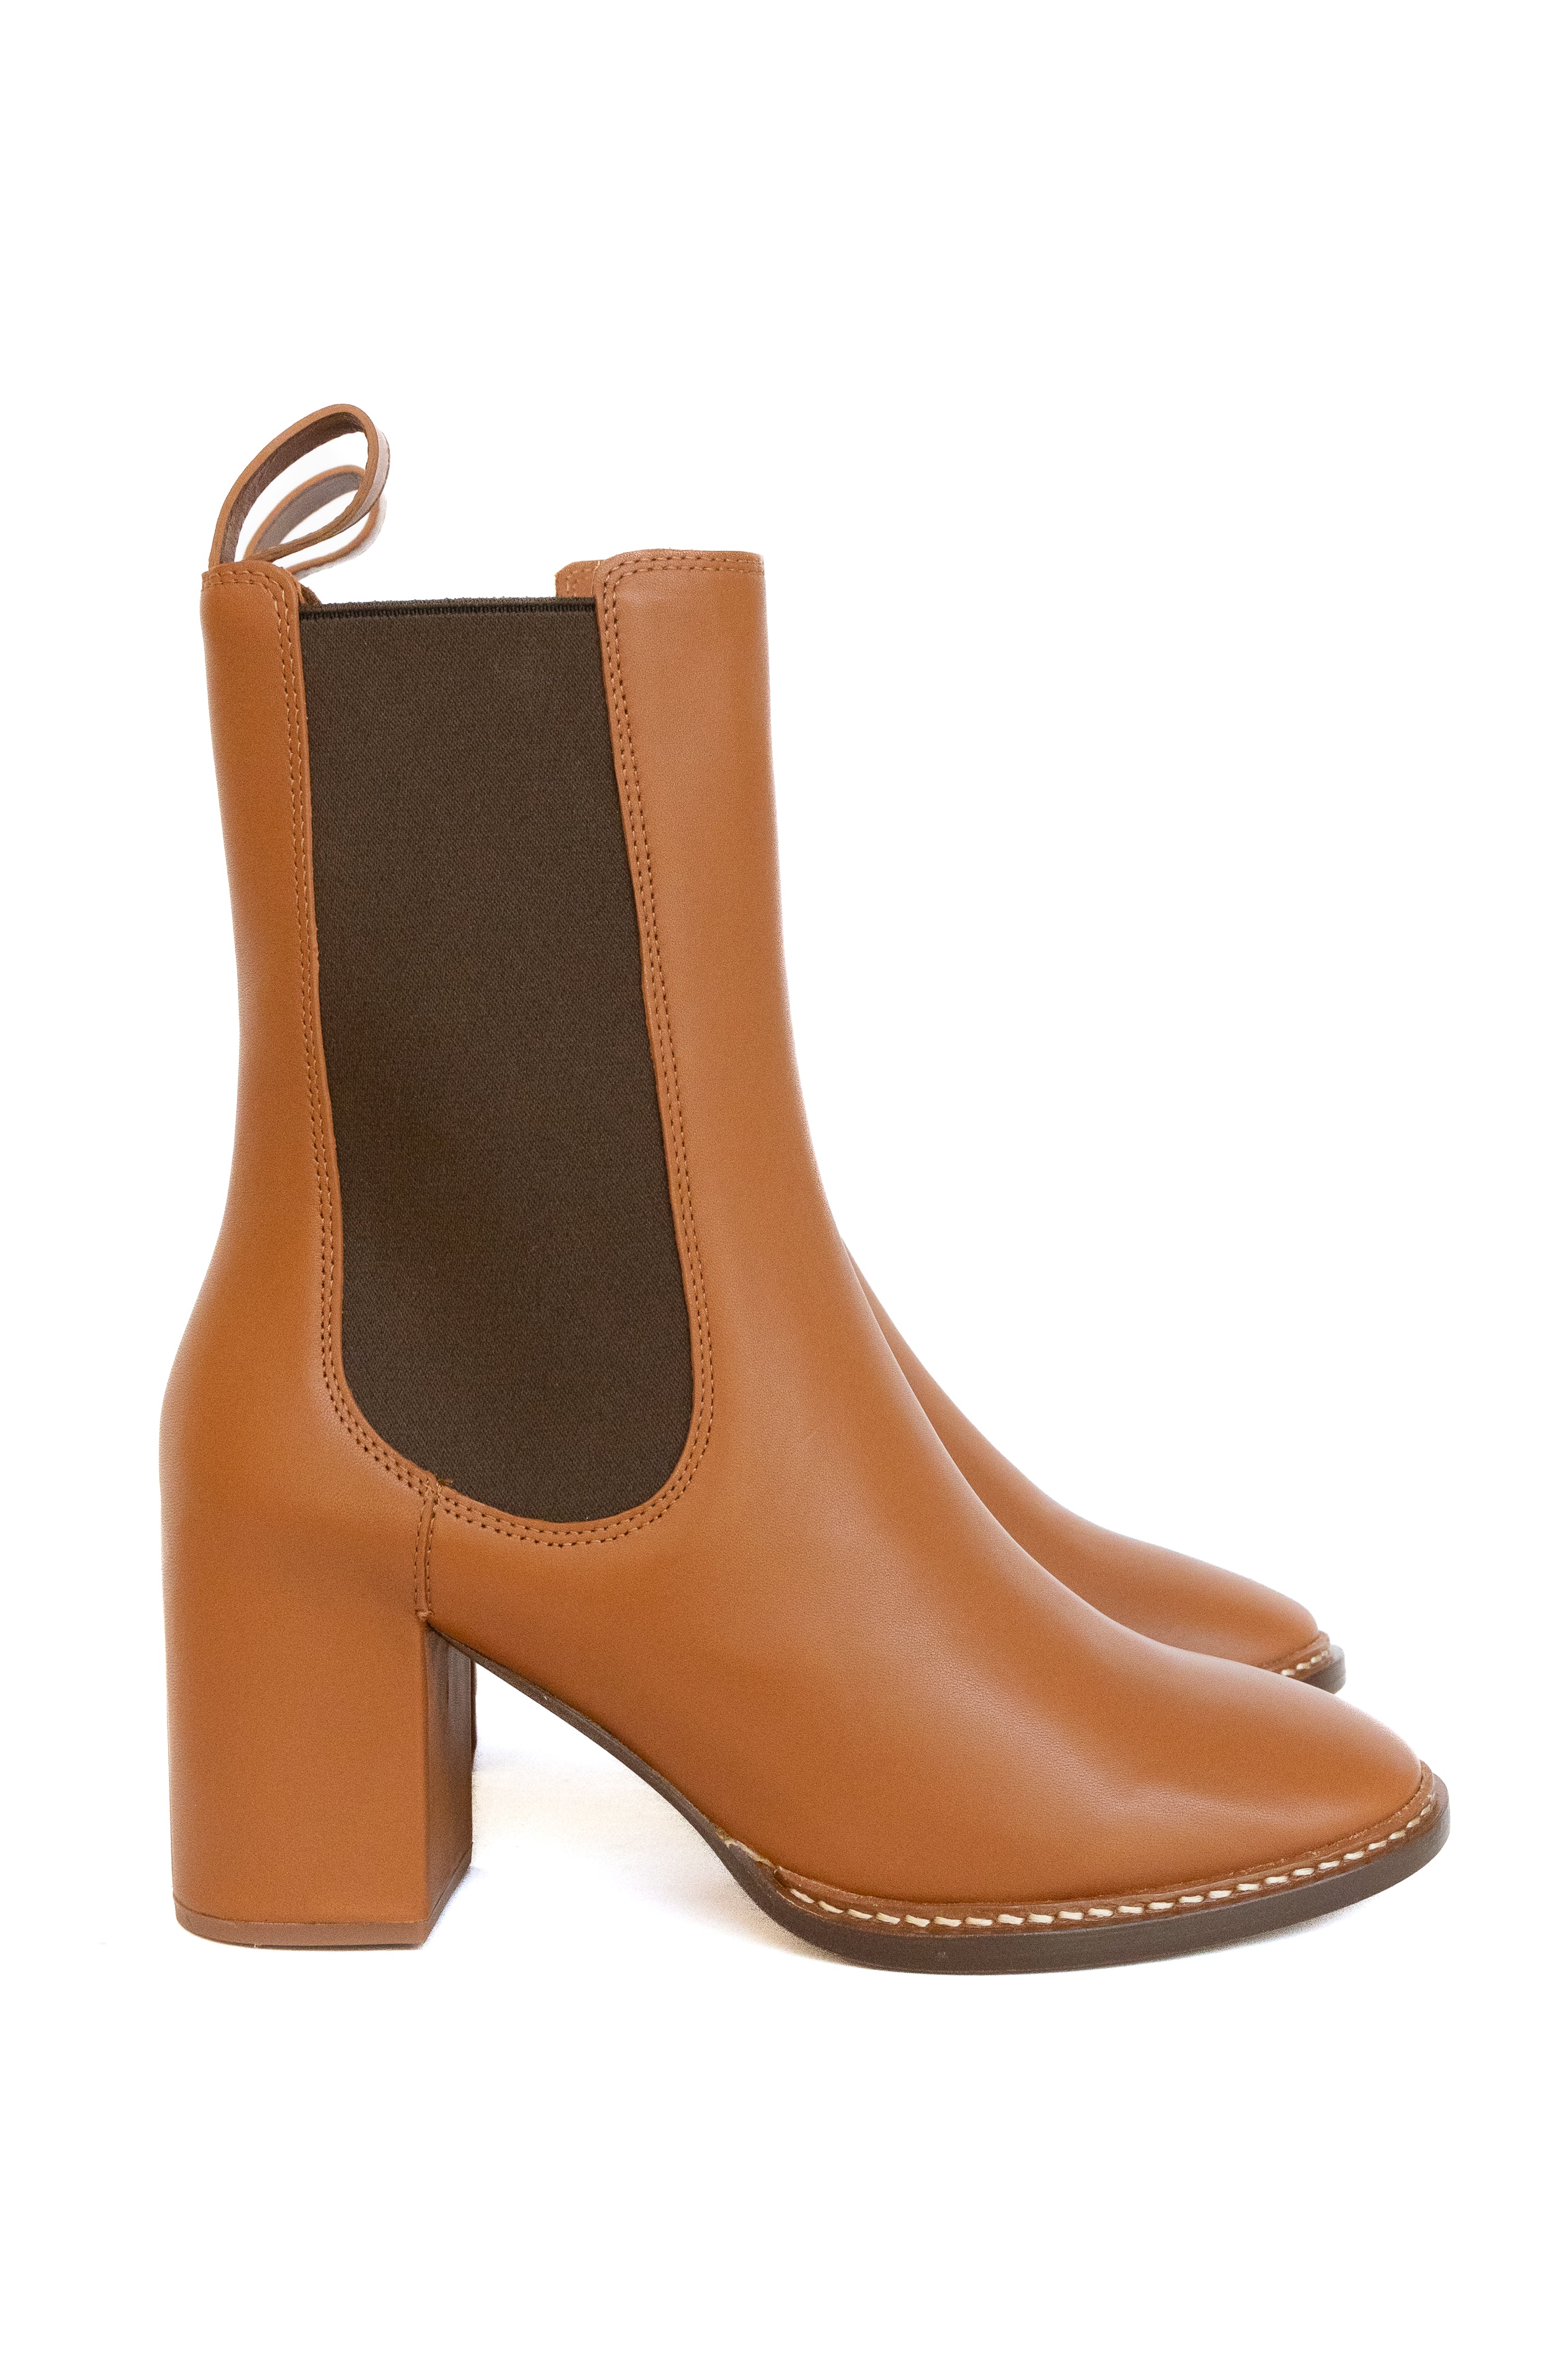 These Taryn Chelsea Boots from Ulla Johnson are crafted from quality calfskin leather with a 70mm covered heel. Benefiting from elasticated side panels and pull tabs, they are easy to wear and a classic addition to any wardrobe.